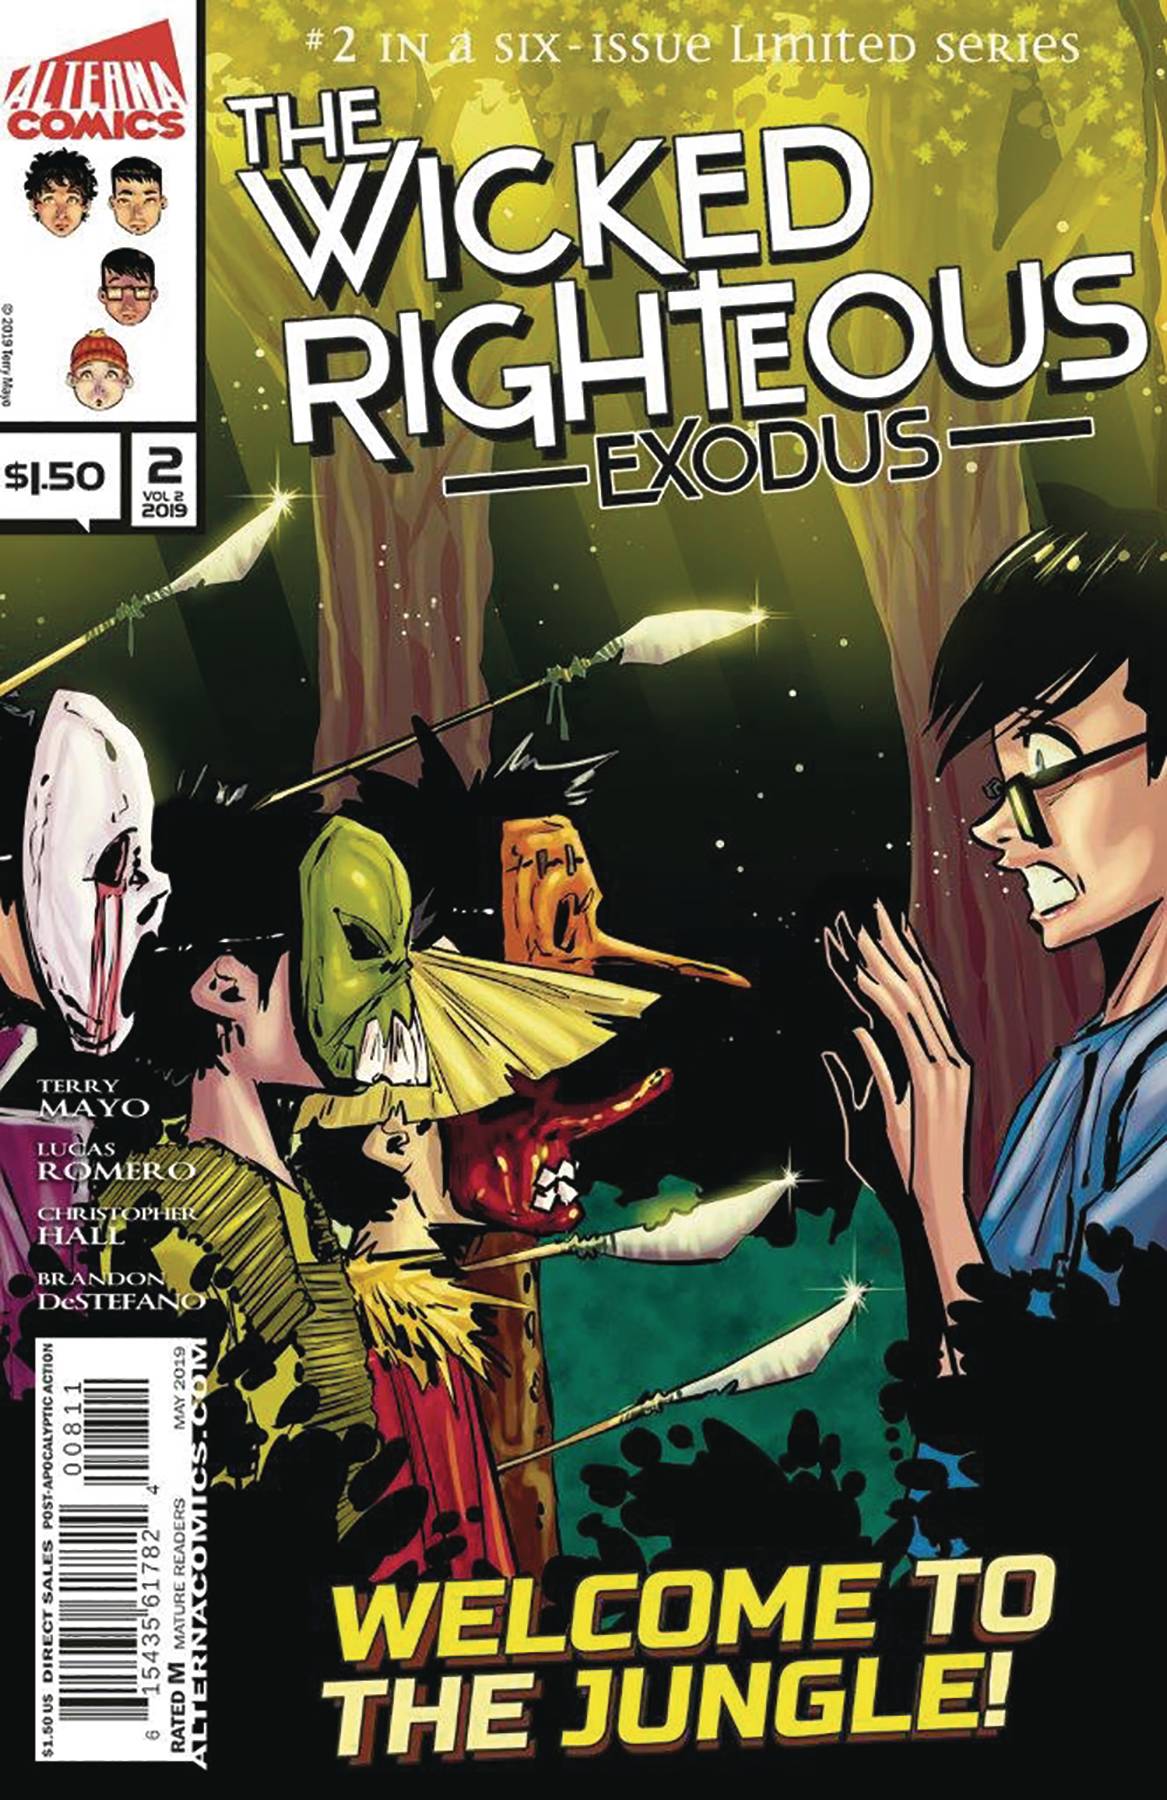 Wicked Righteous Volume 2 #2 (Mature) (Of 6)